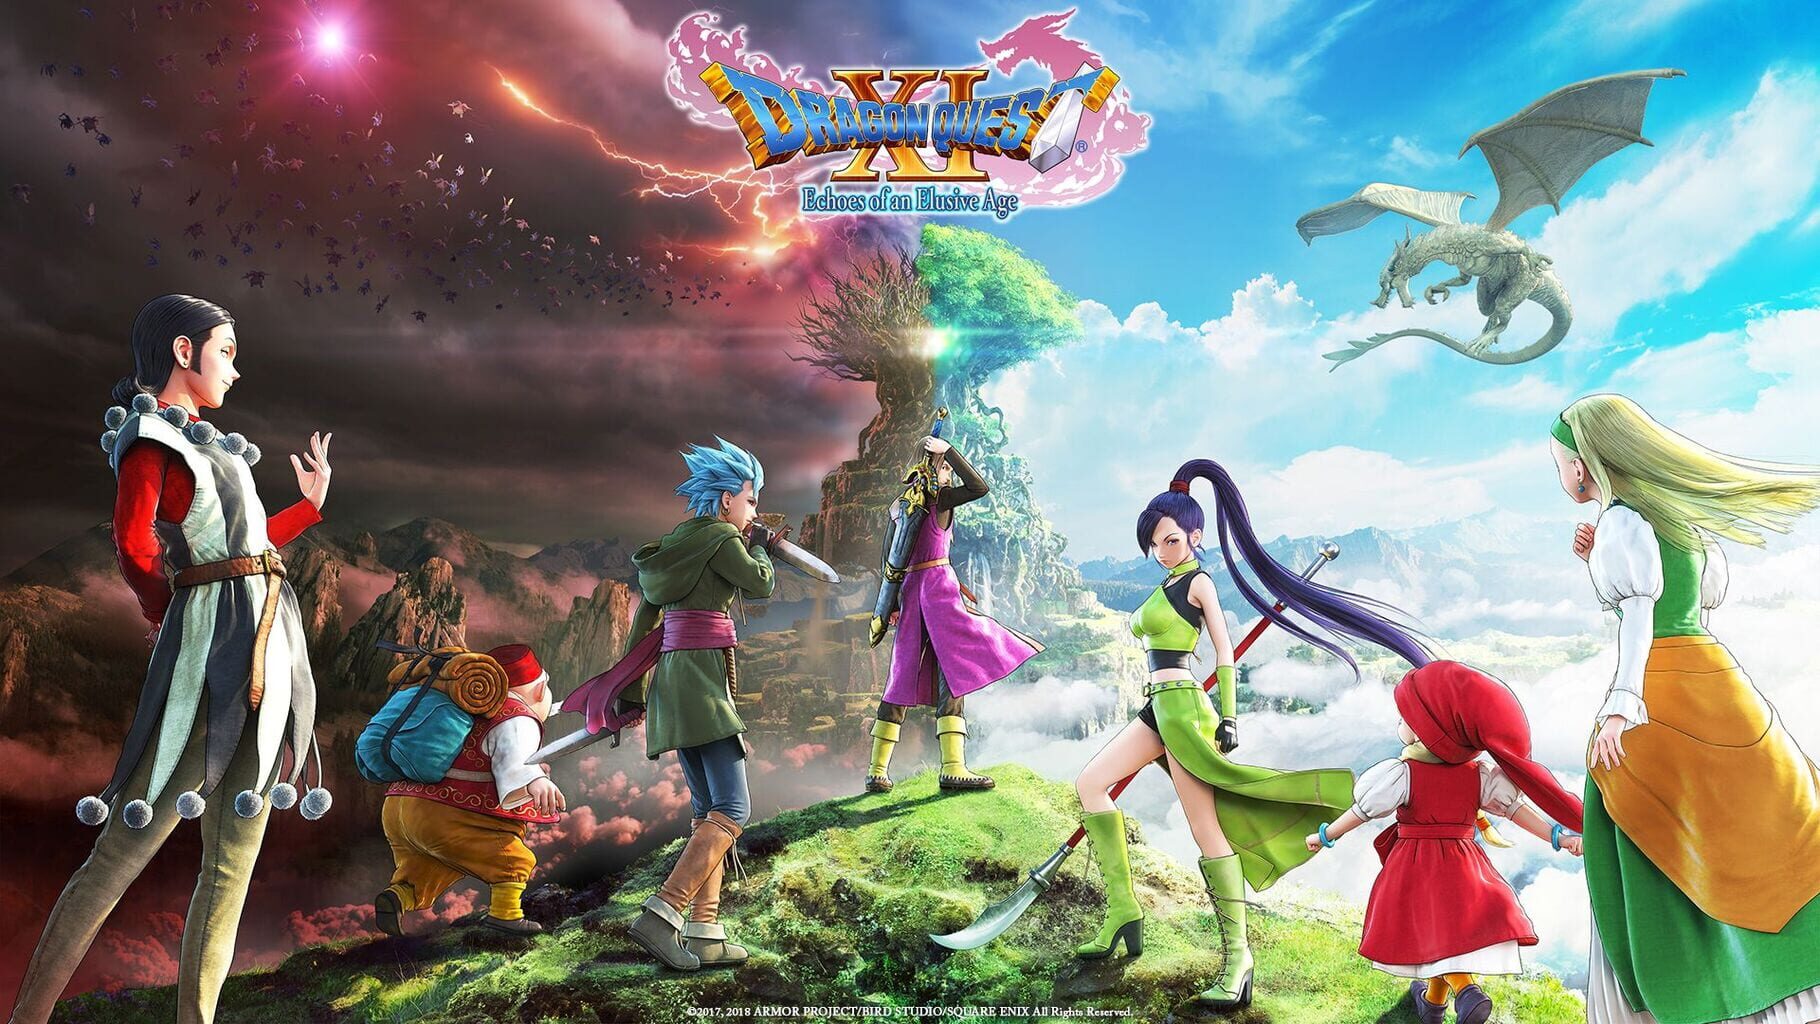 Arte - Dragon Quest XI: Echoes of an Elusive Age